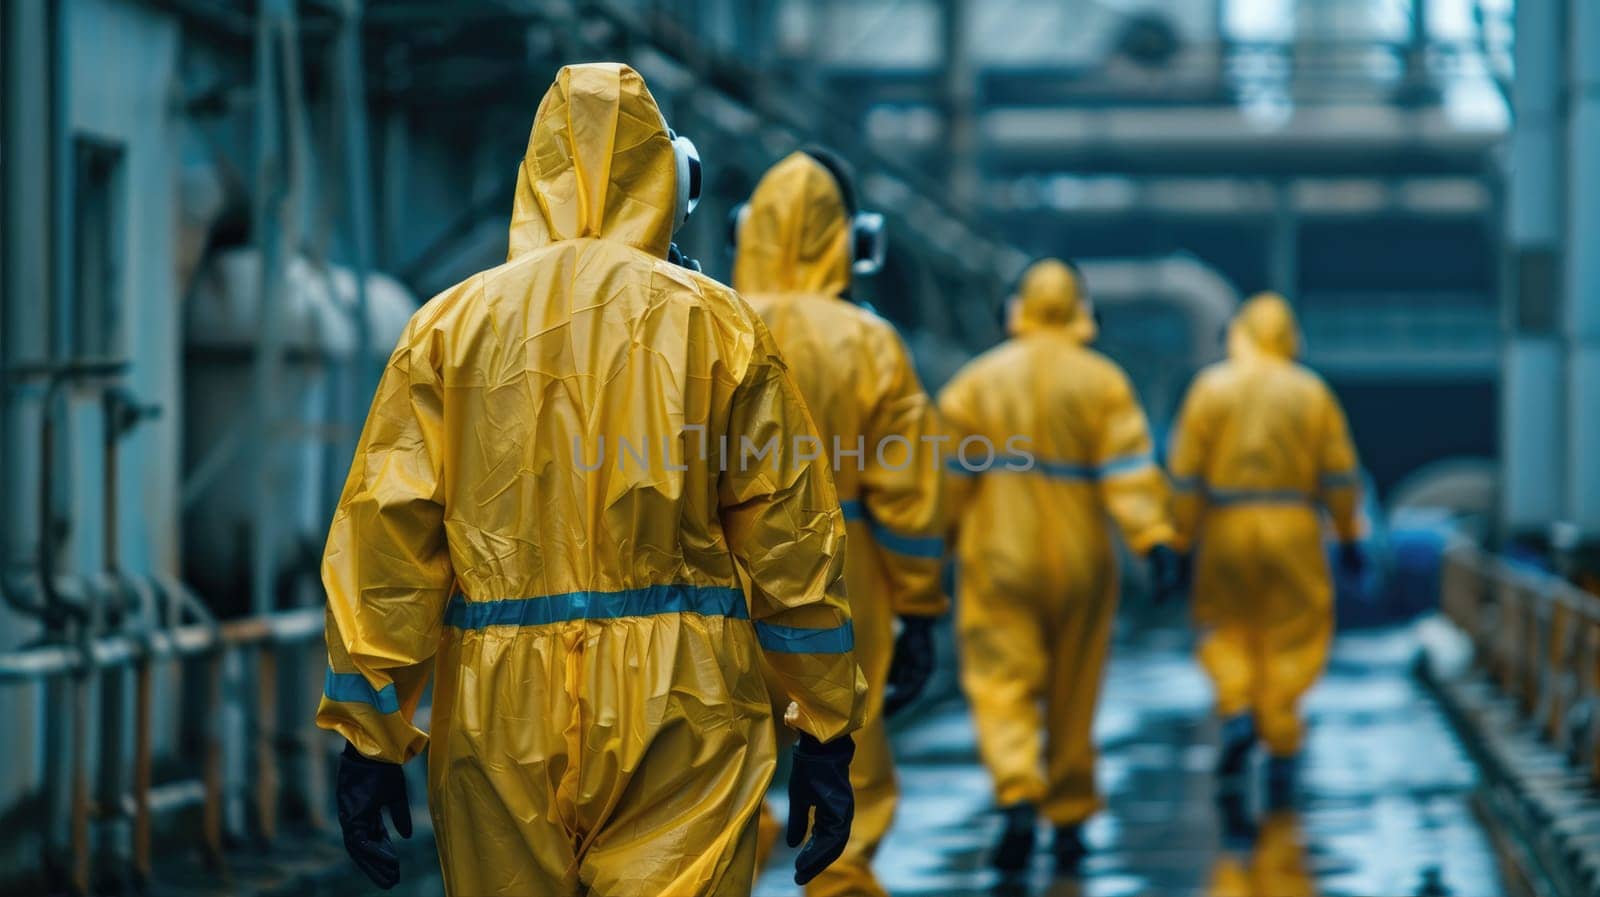 A team wearing yellow hazmat suits makes their way down the hallway, prepared for any hazardous conditions that may arise during their mission. AI